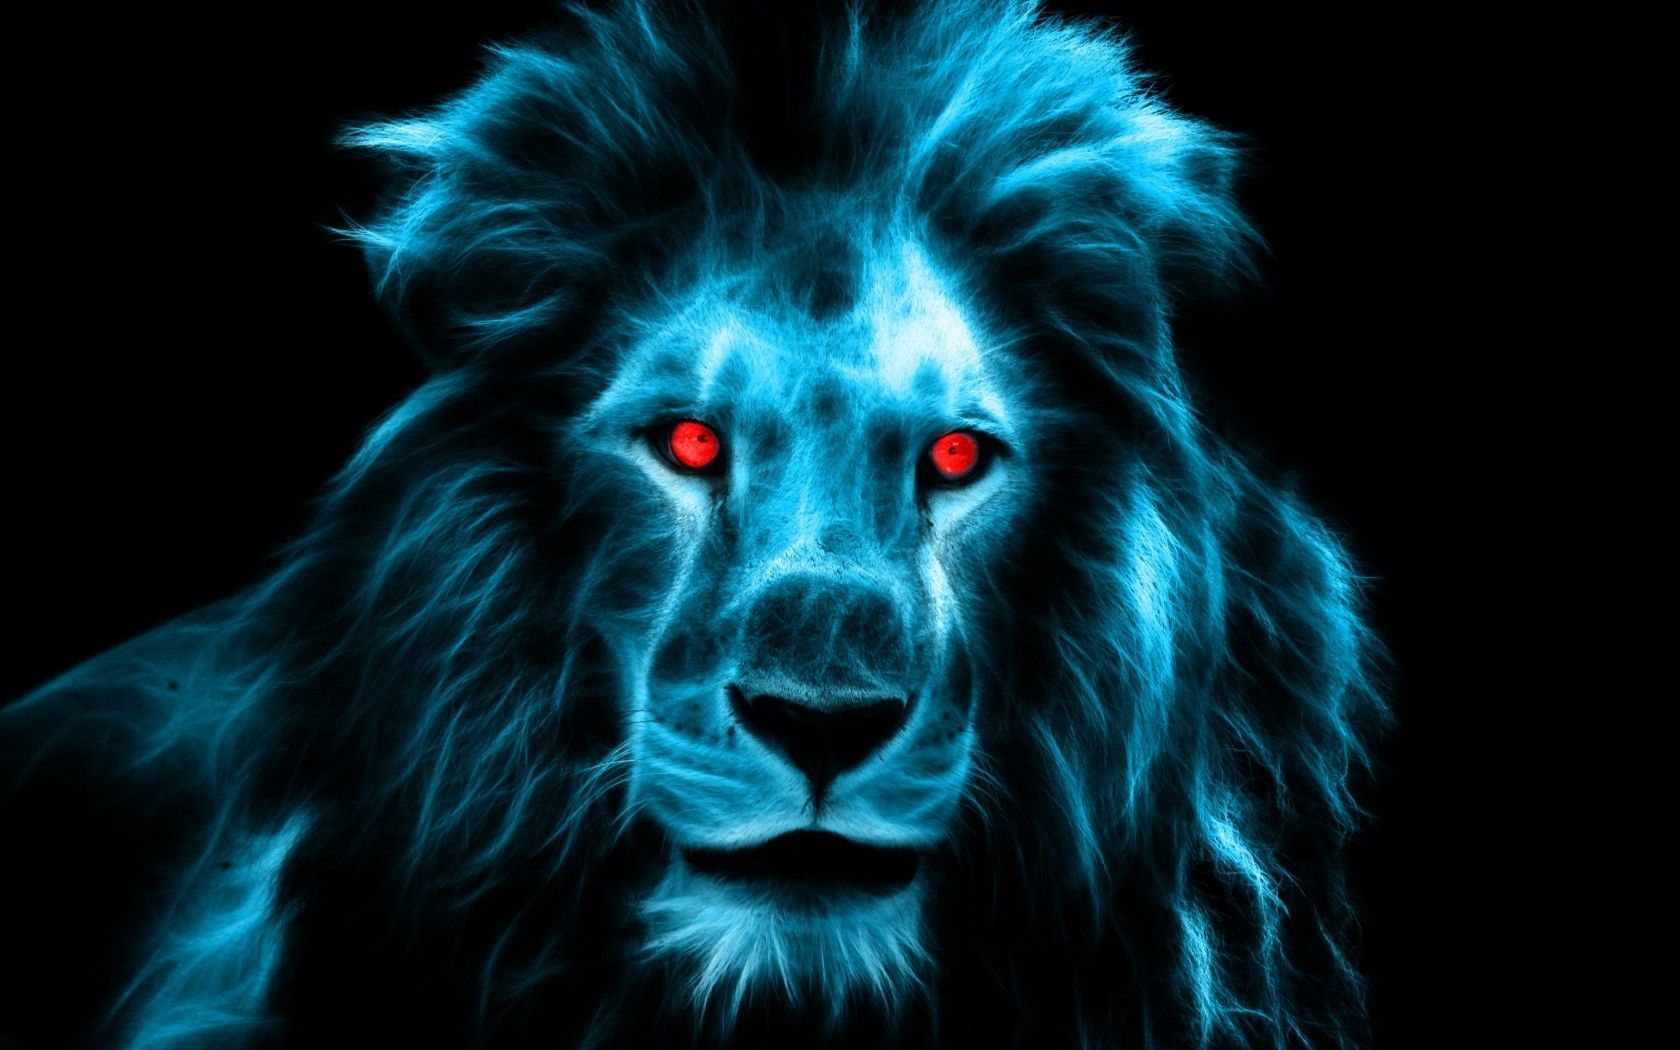 Neon Lion Wallpapers